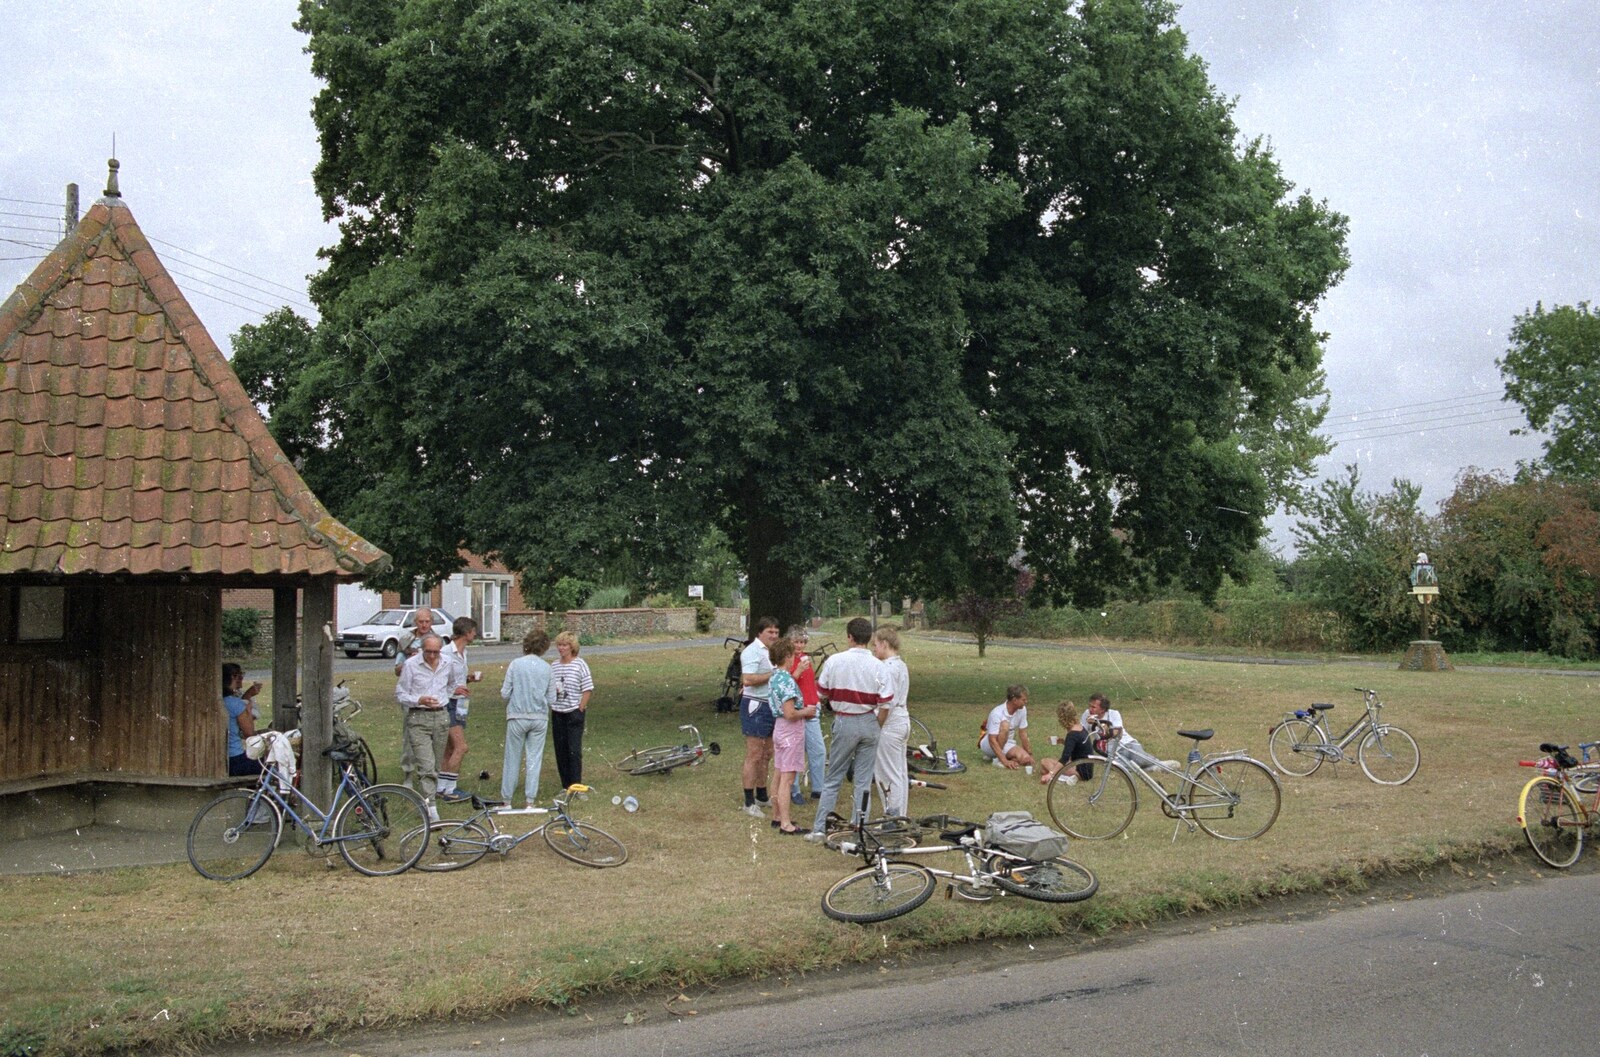 Bikes on Redgrave village green from A Bike Ride to Redgrave, Suffolk - 11th August 1990